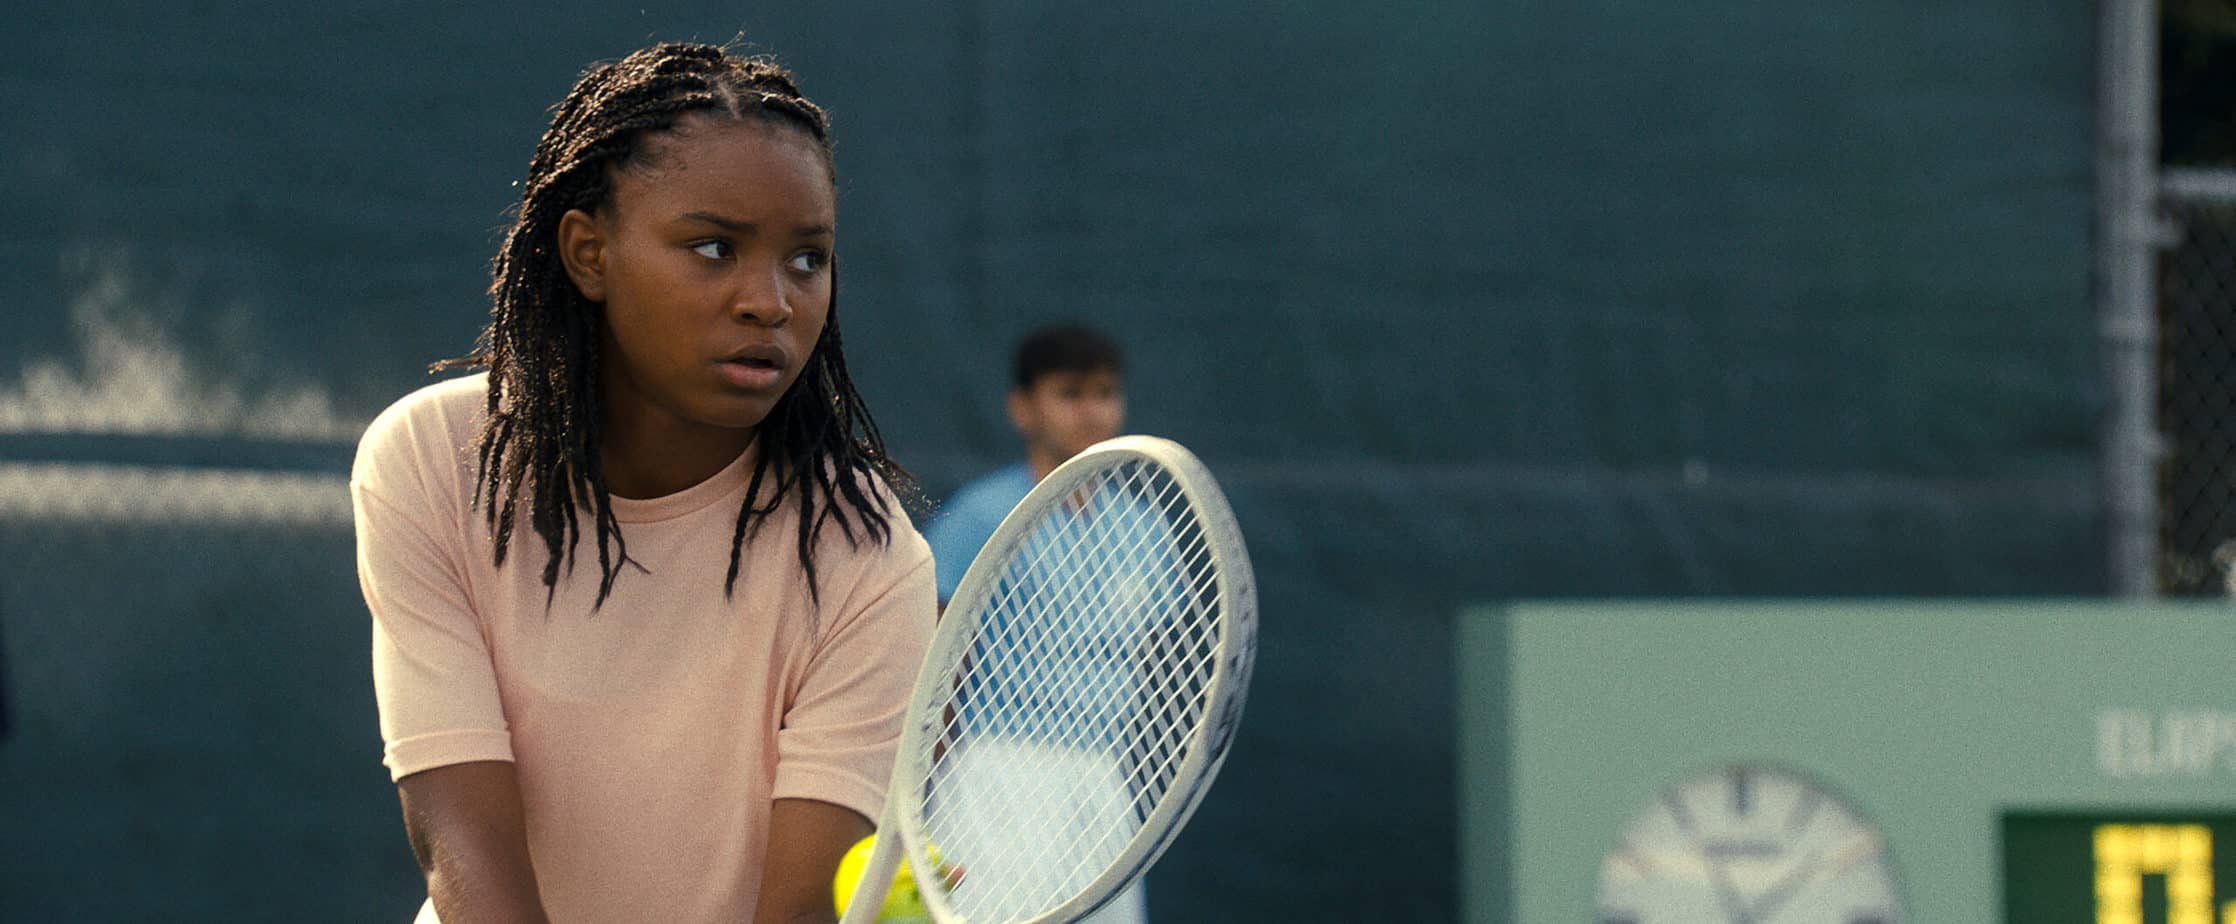 is king richard appropriate for kids under 13? Venus and Serena Williams playing tennis